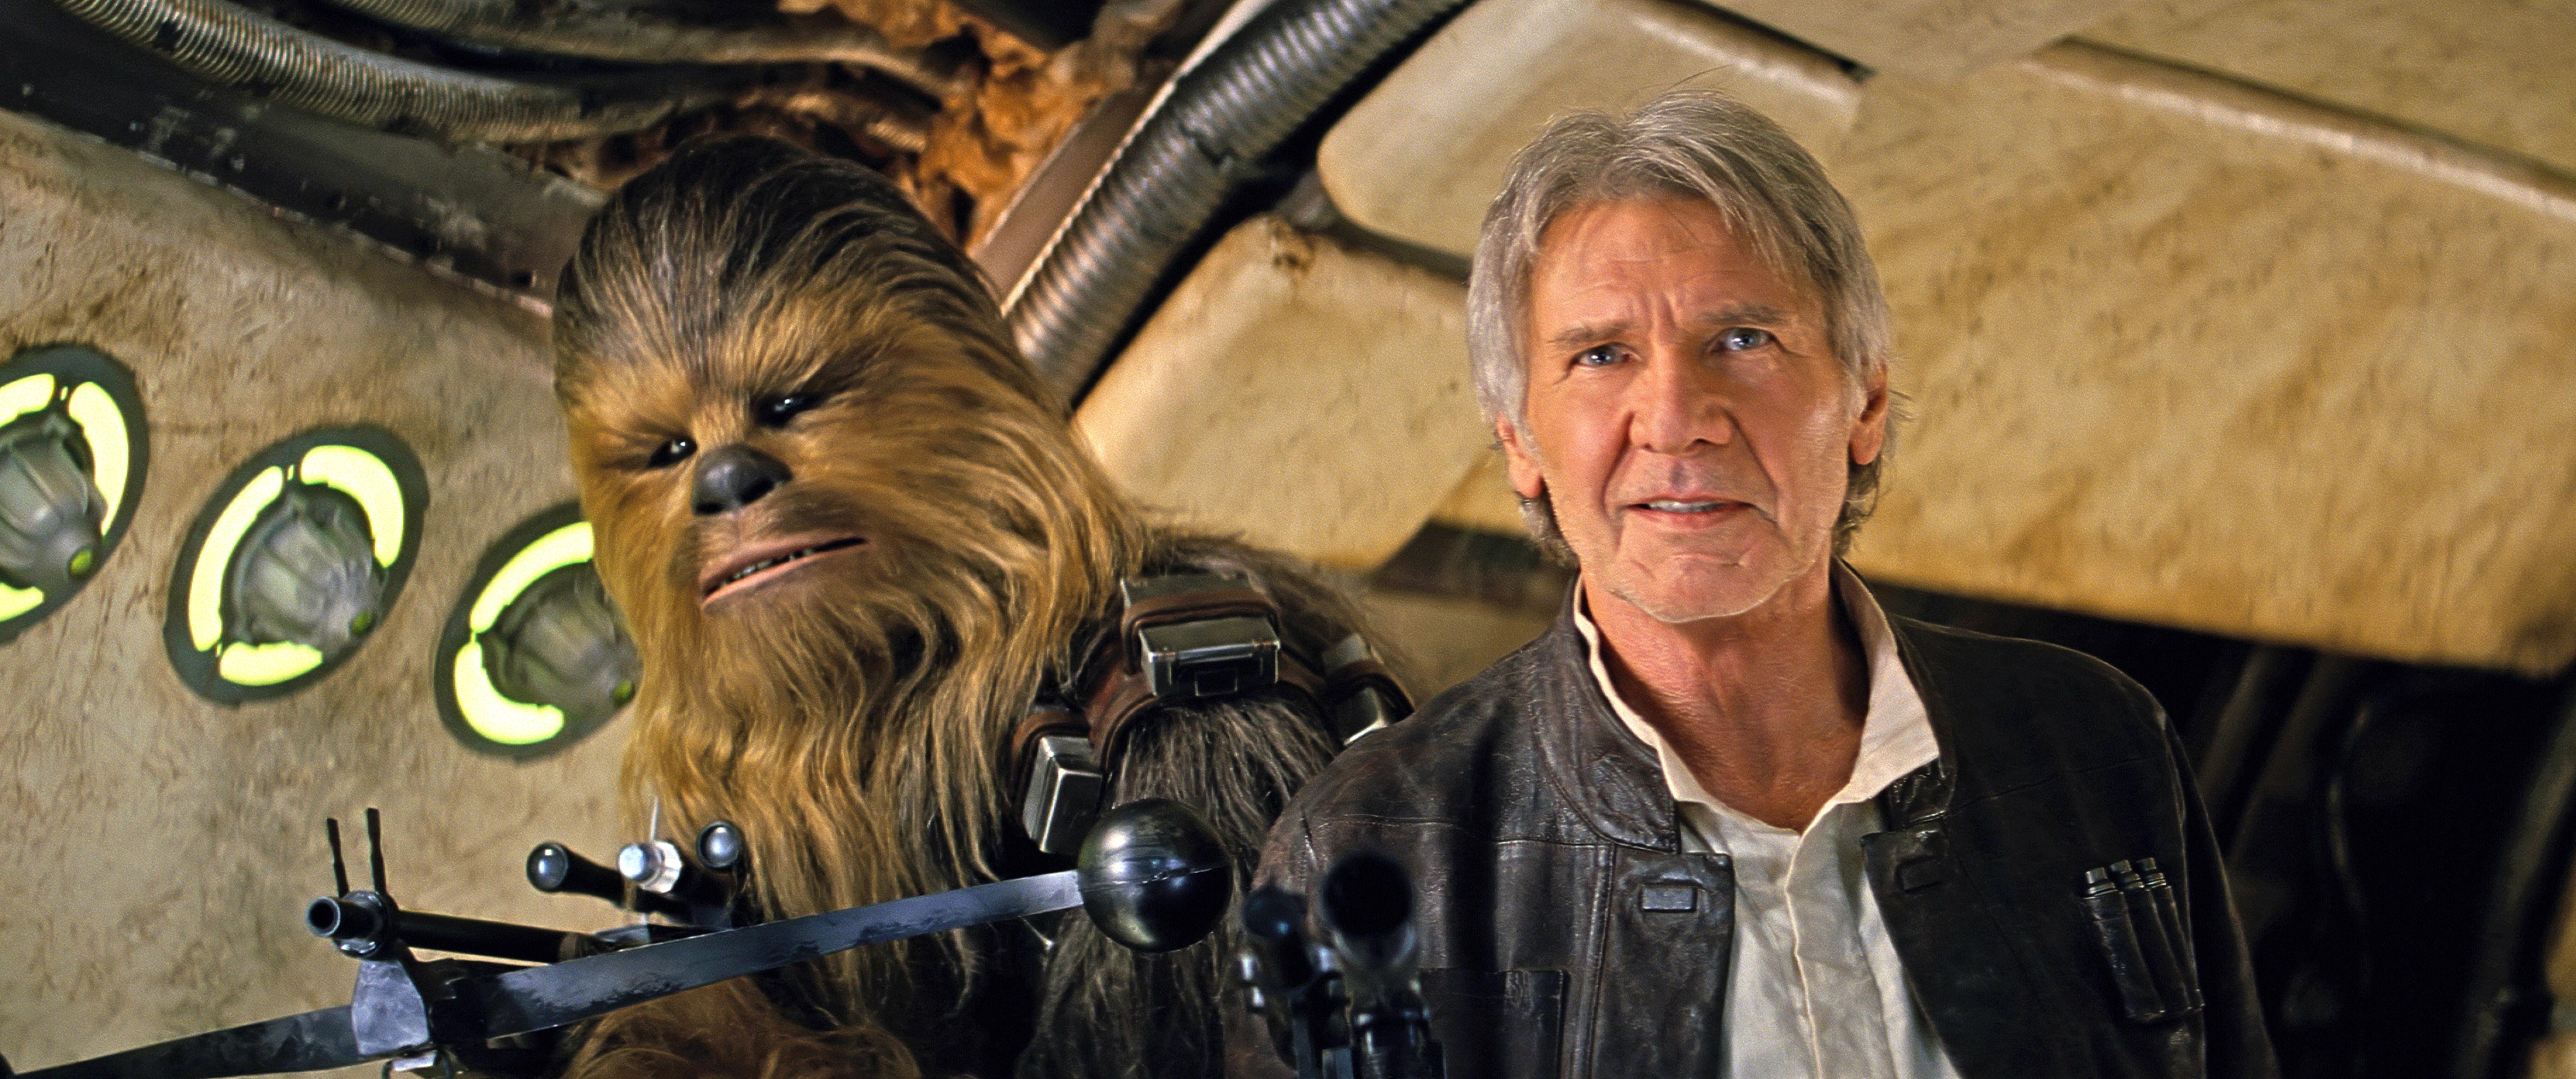 Han solo ‘star wars’ spinoff in the works